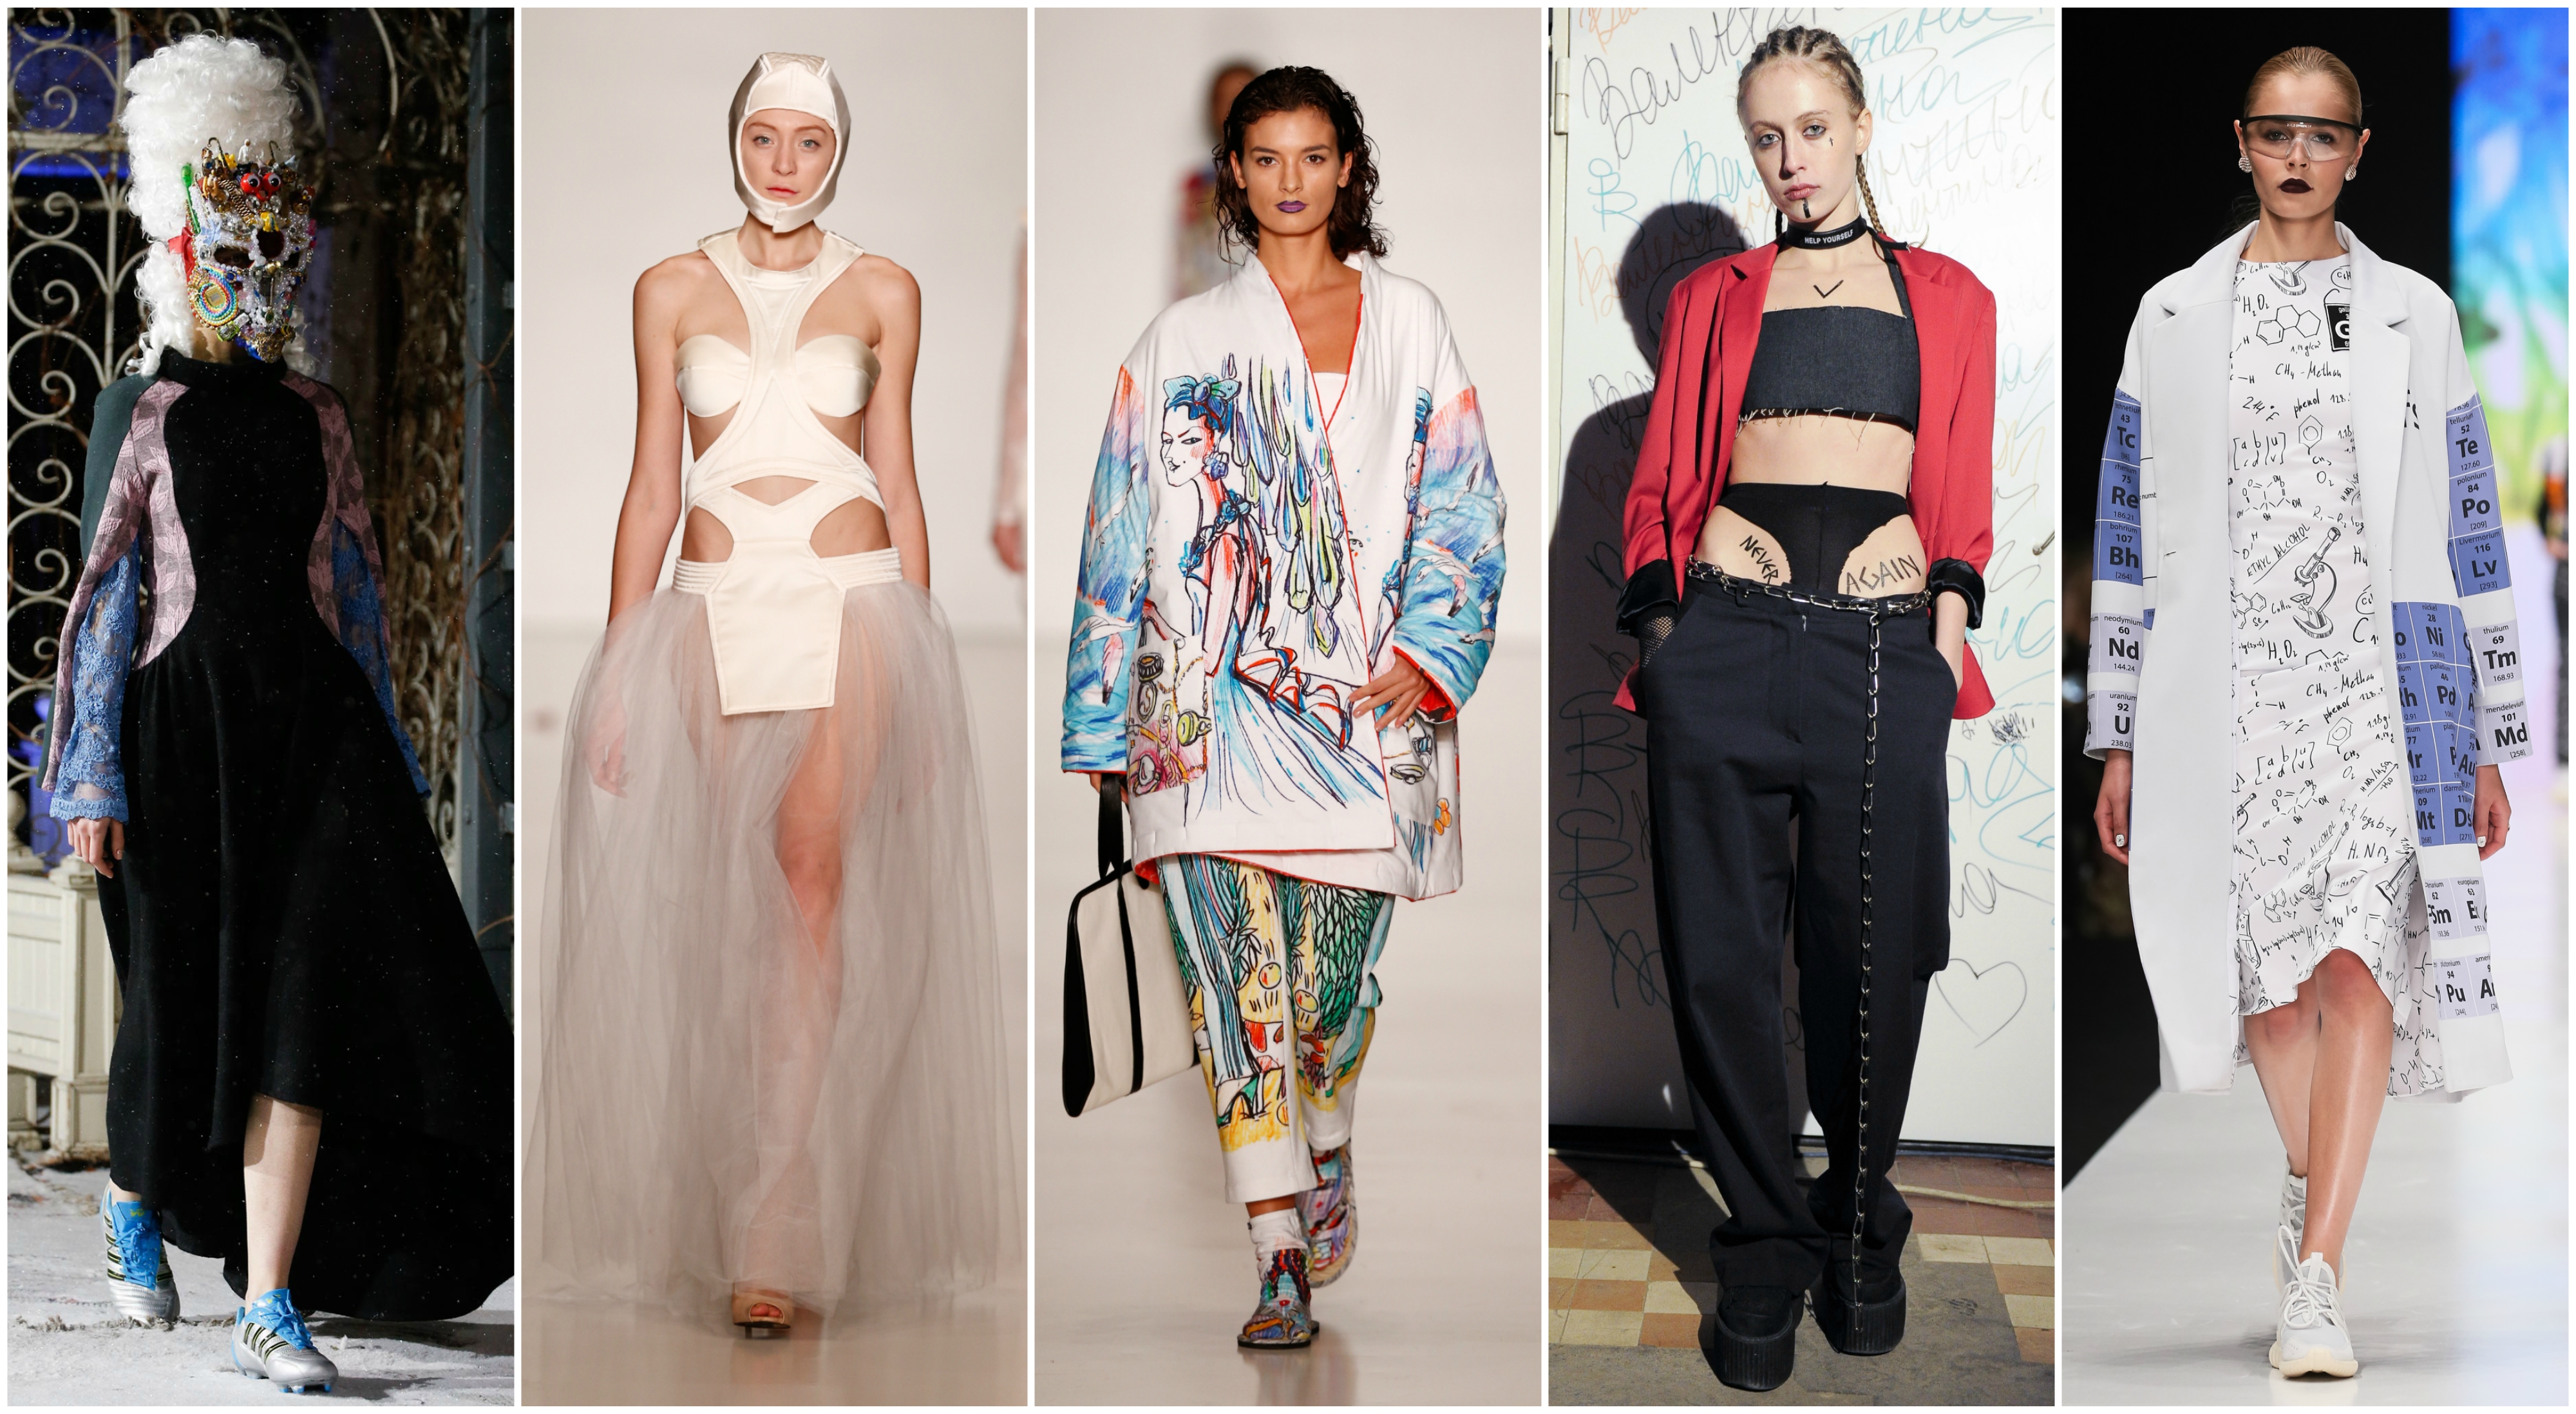 11 Unforgettable Past Russian Fashion Week Collections